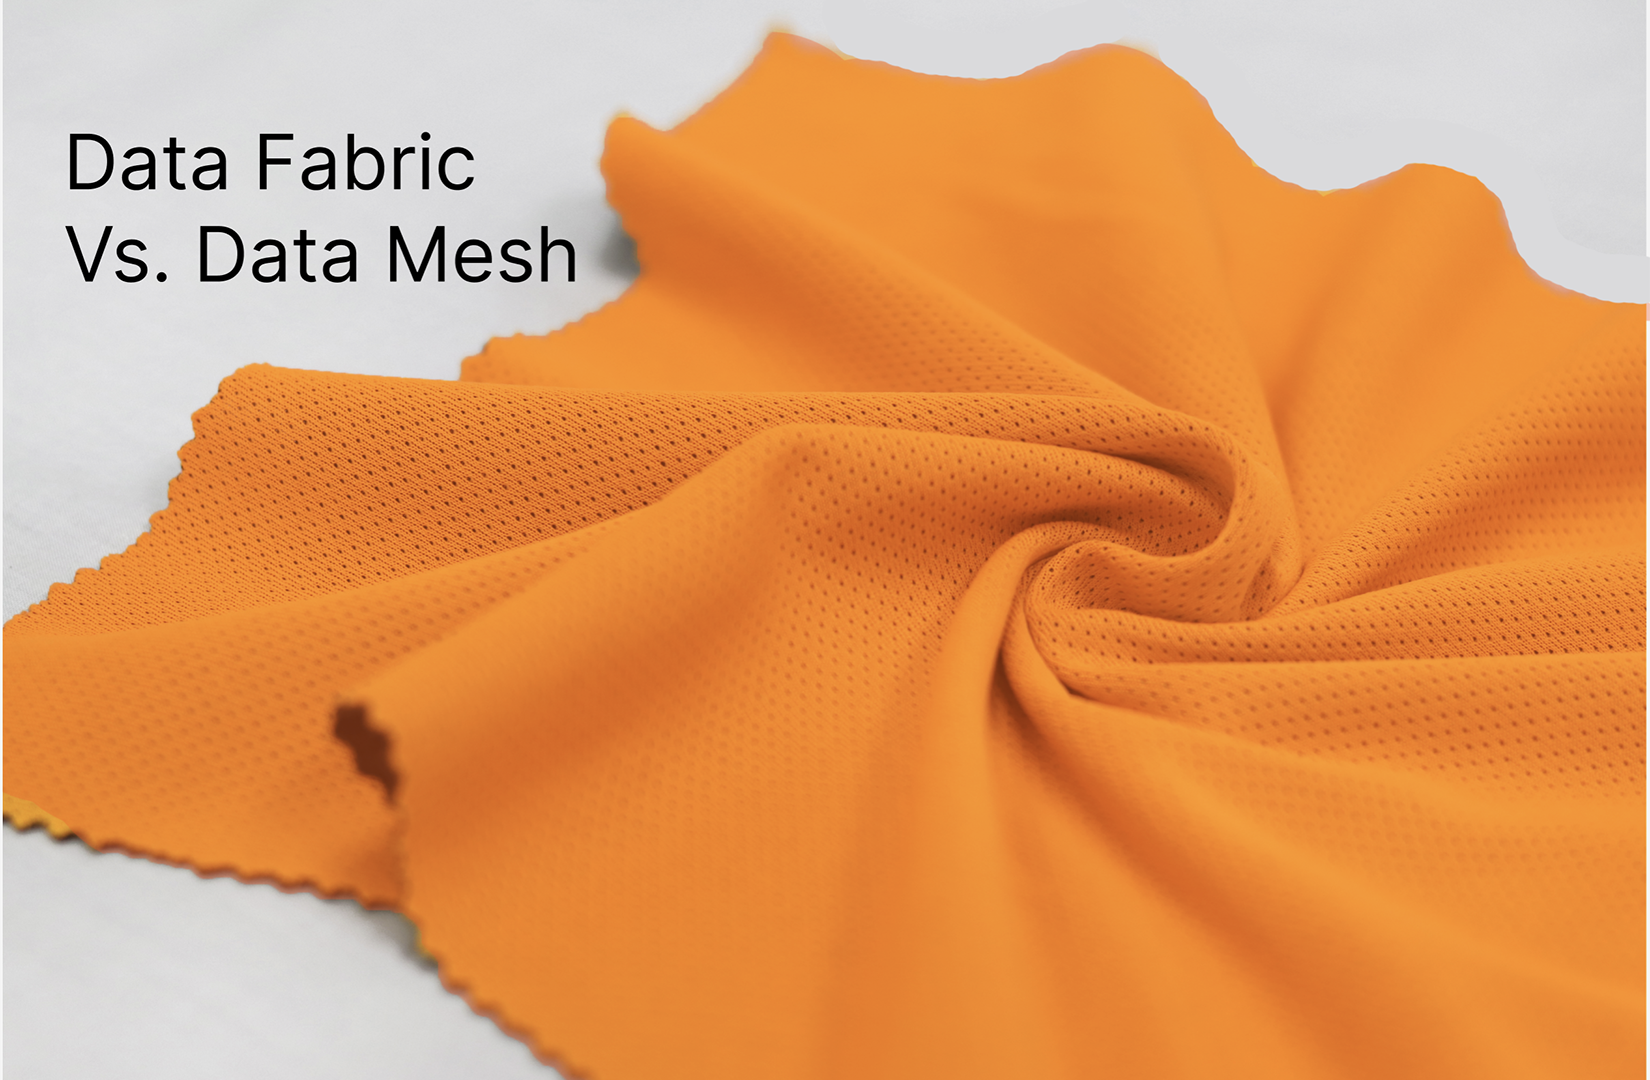 Data Mesh vs. Data Fabric: What's the Difference?